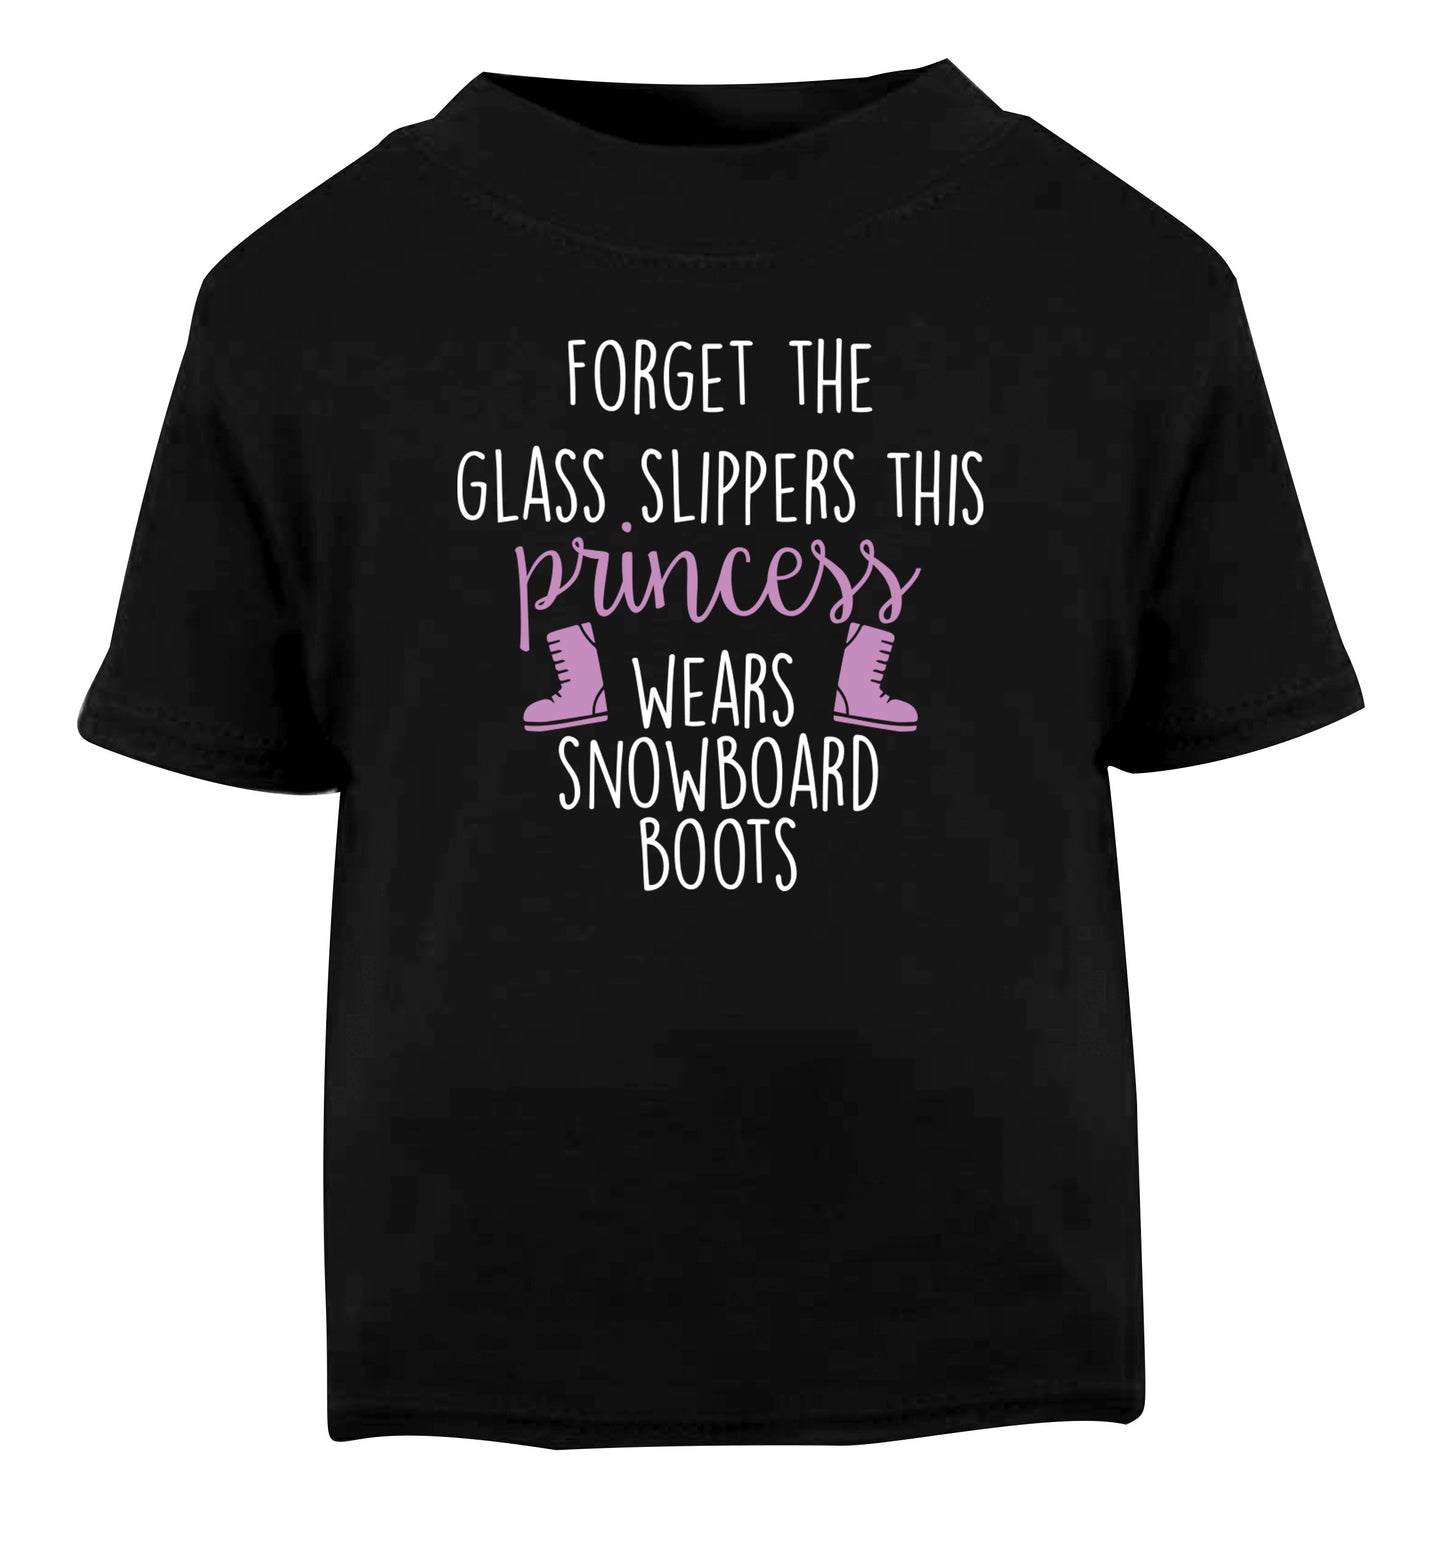 Forget the glass slippers this princess wears snowboard boots Black Baby Toddler Tshirt 2 years